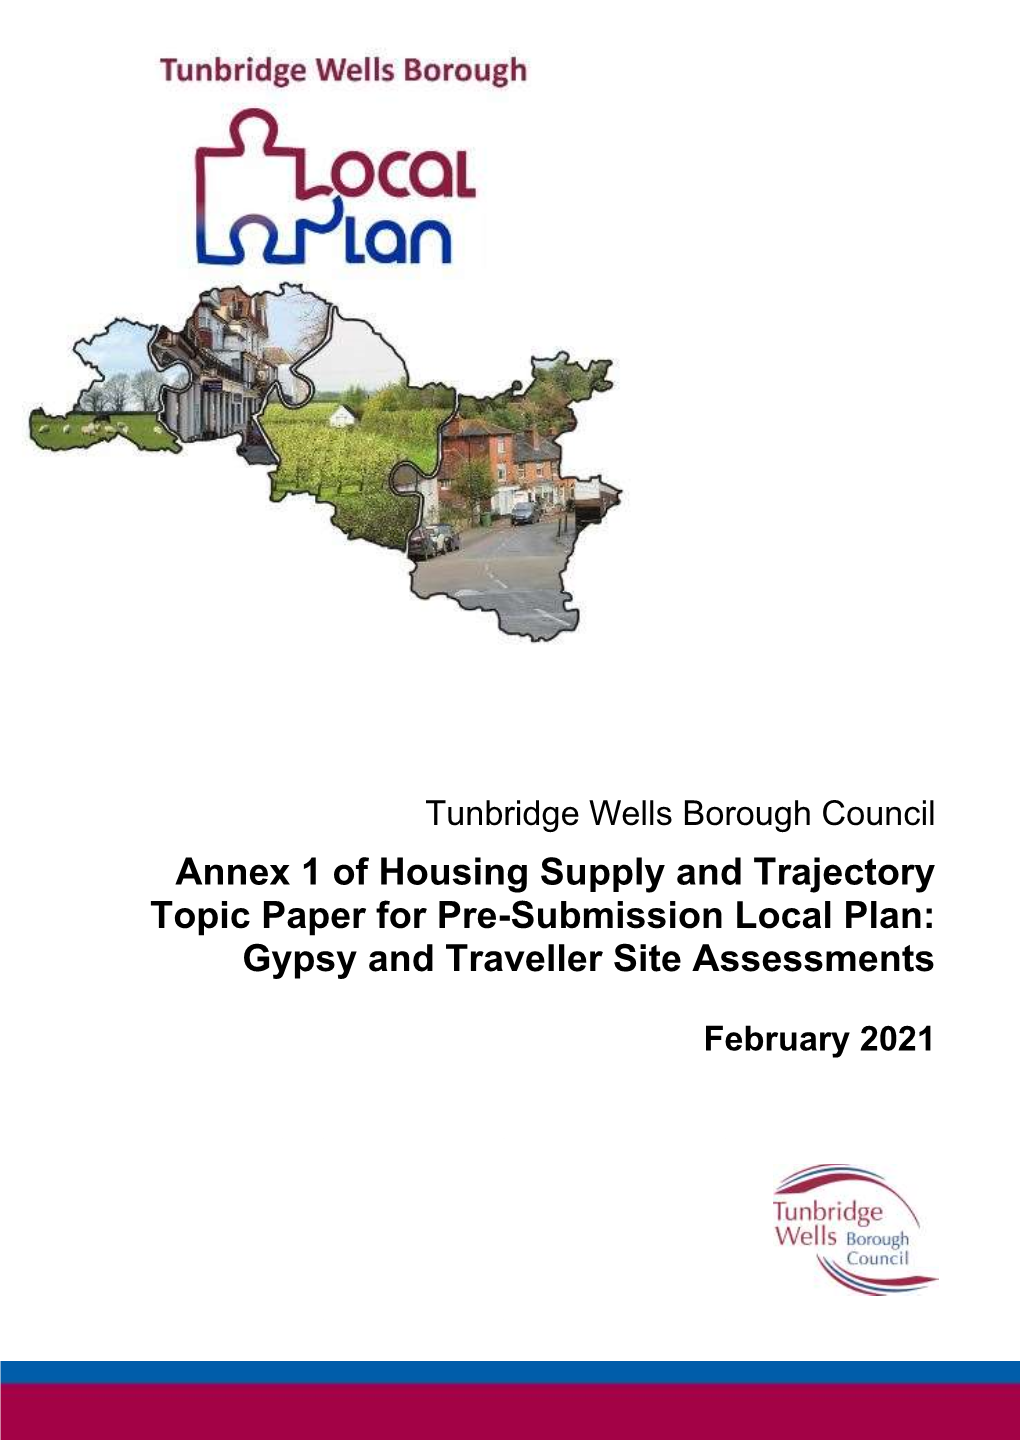 Annex 1 of Housing Supply and Trajectory Topic Paper for Pre-Submission Local Plan: Gypsy and Traveller Site Assessments